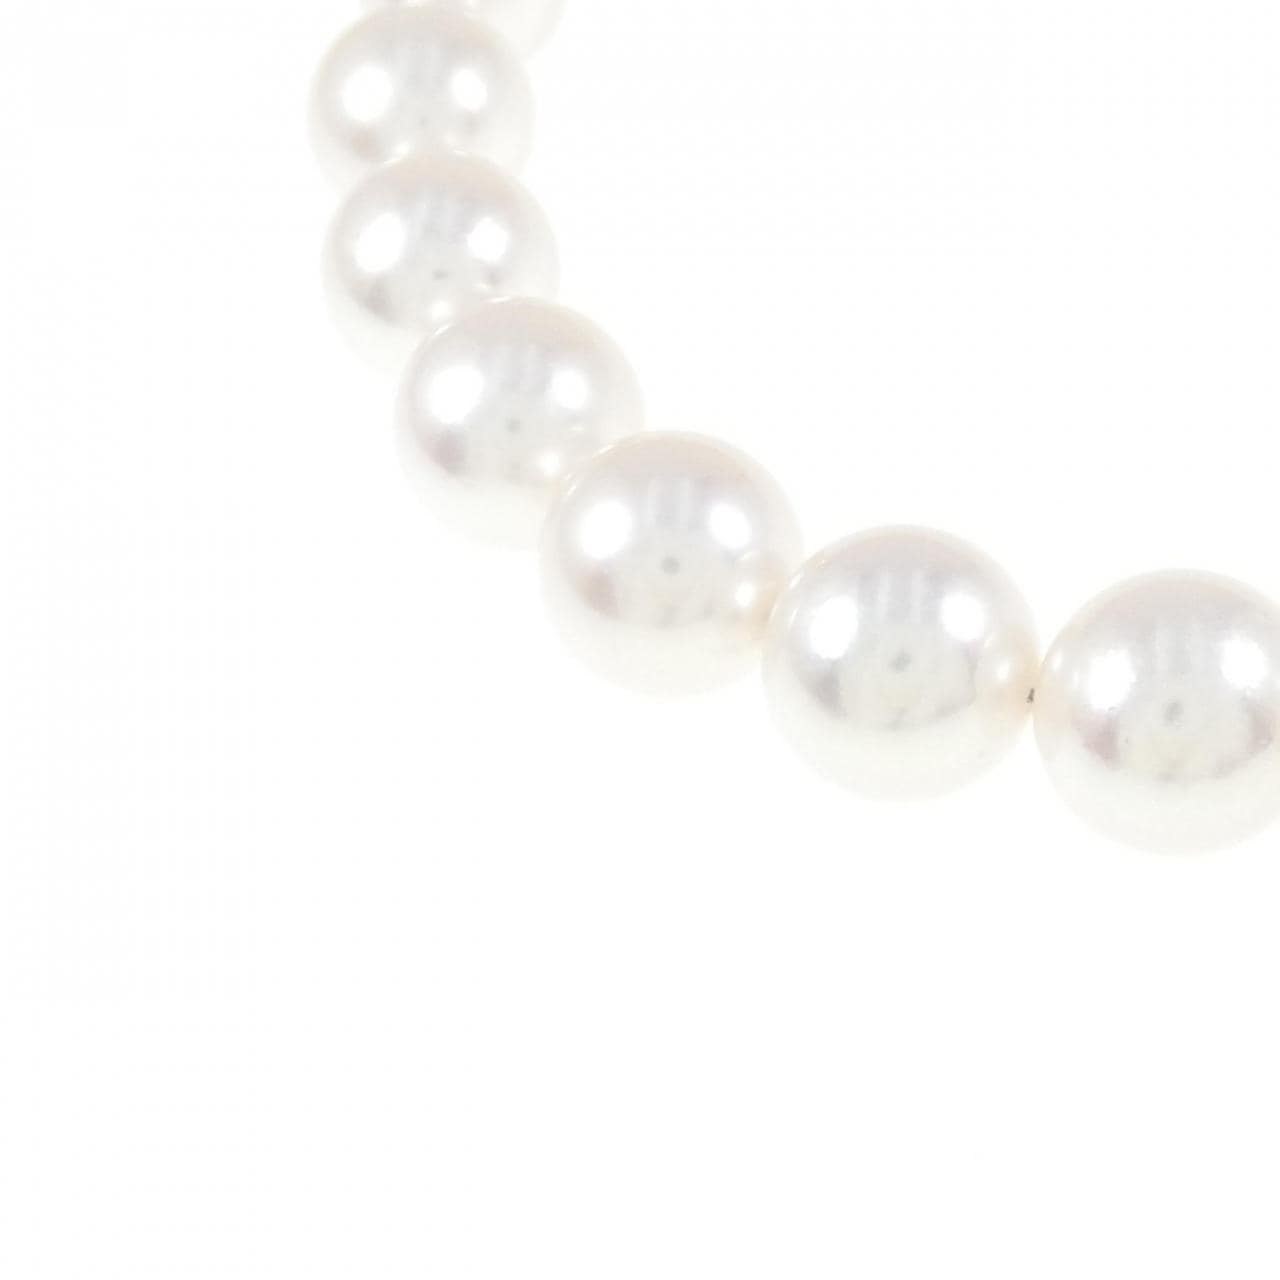 [BRAND NEW] Silver Clasp Akoya Pearl Necklace 8.5-9.0mm